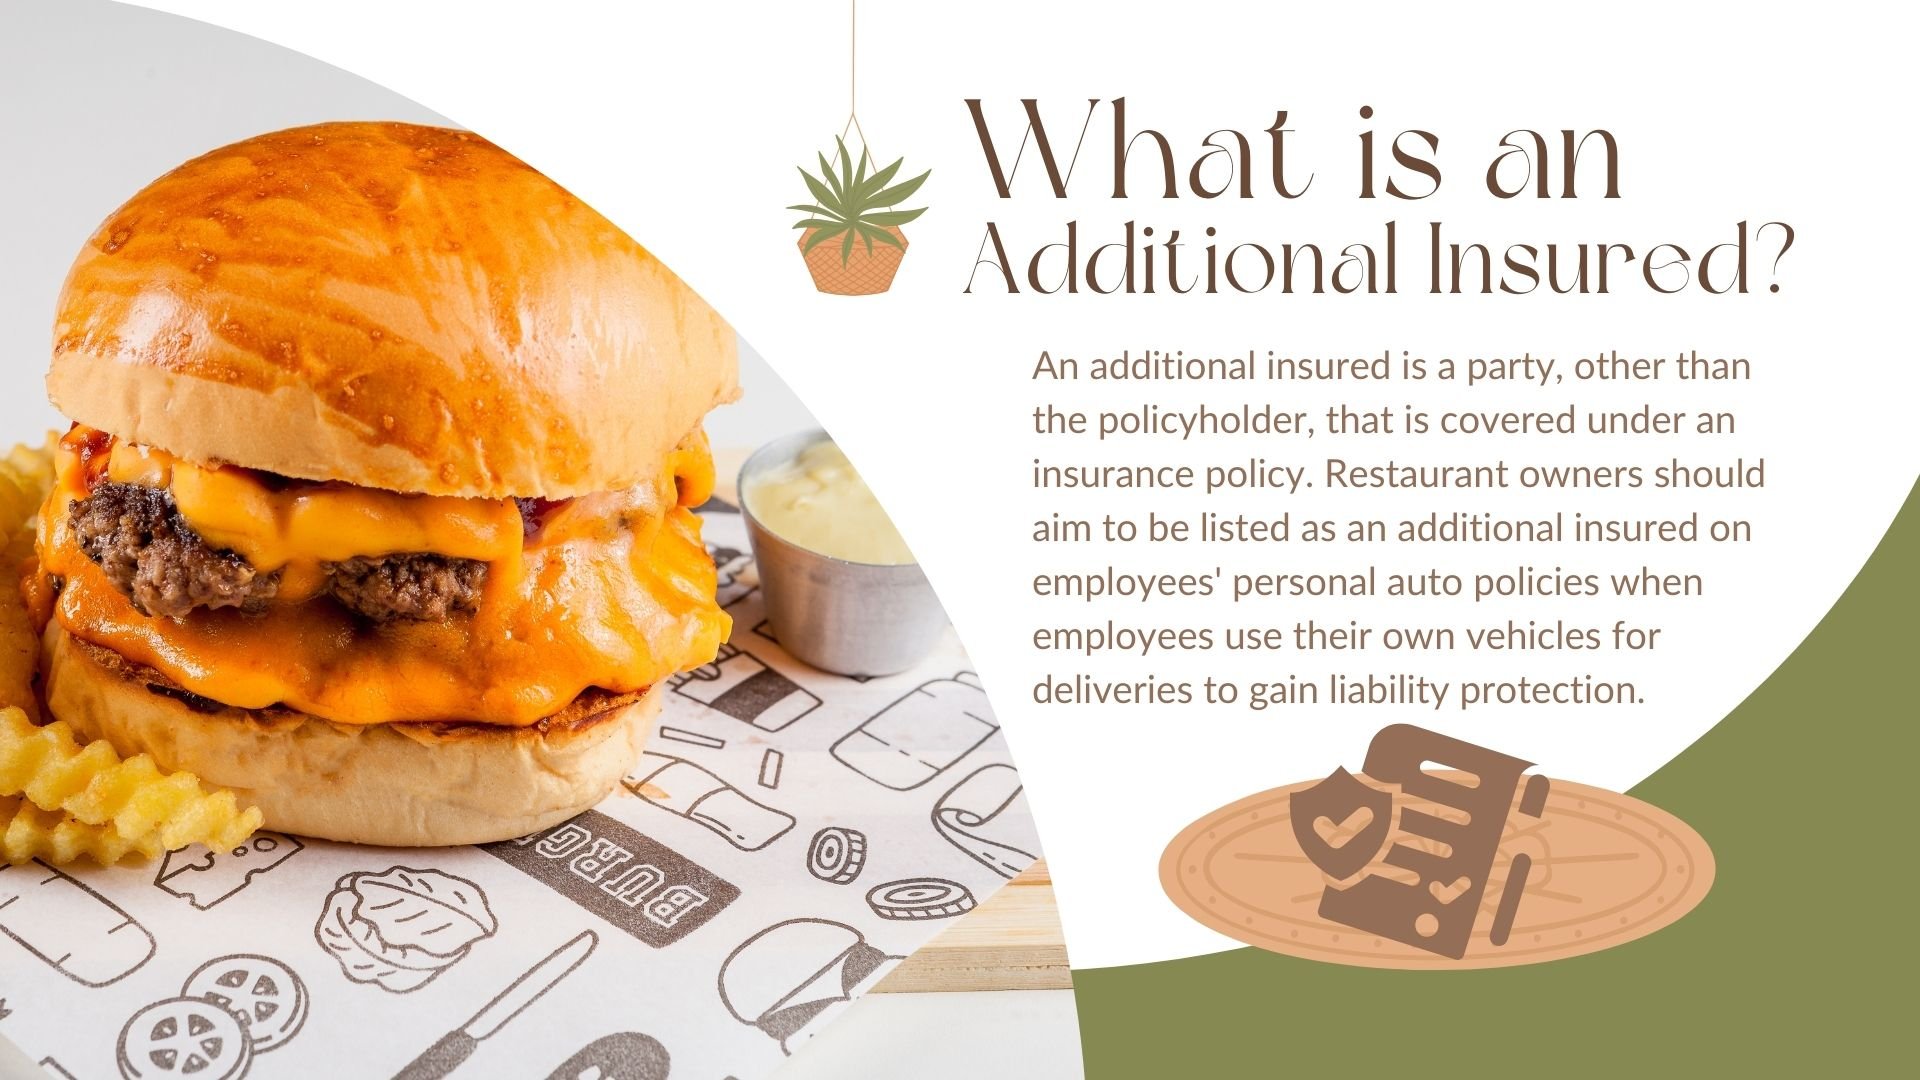 What is an Additional Insured